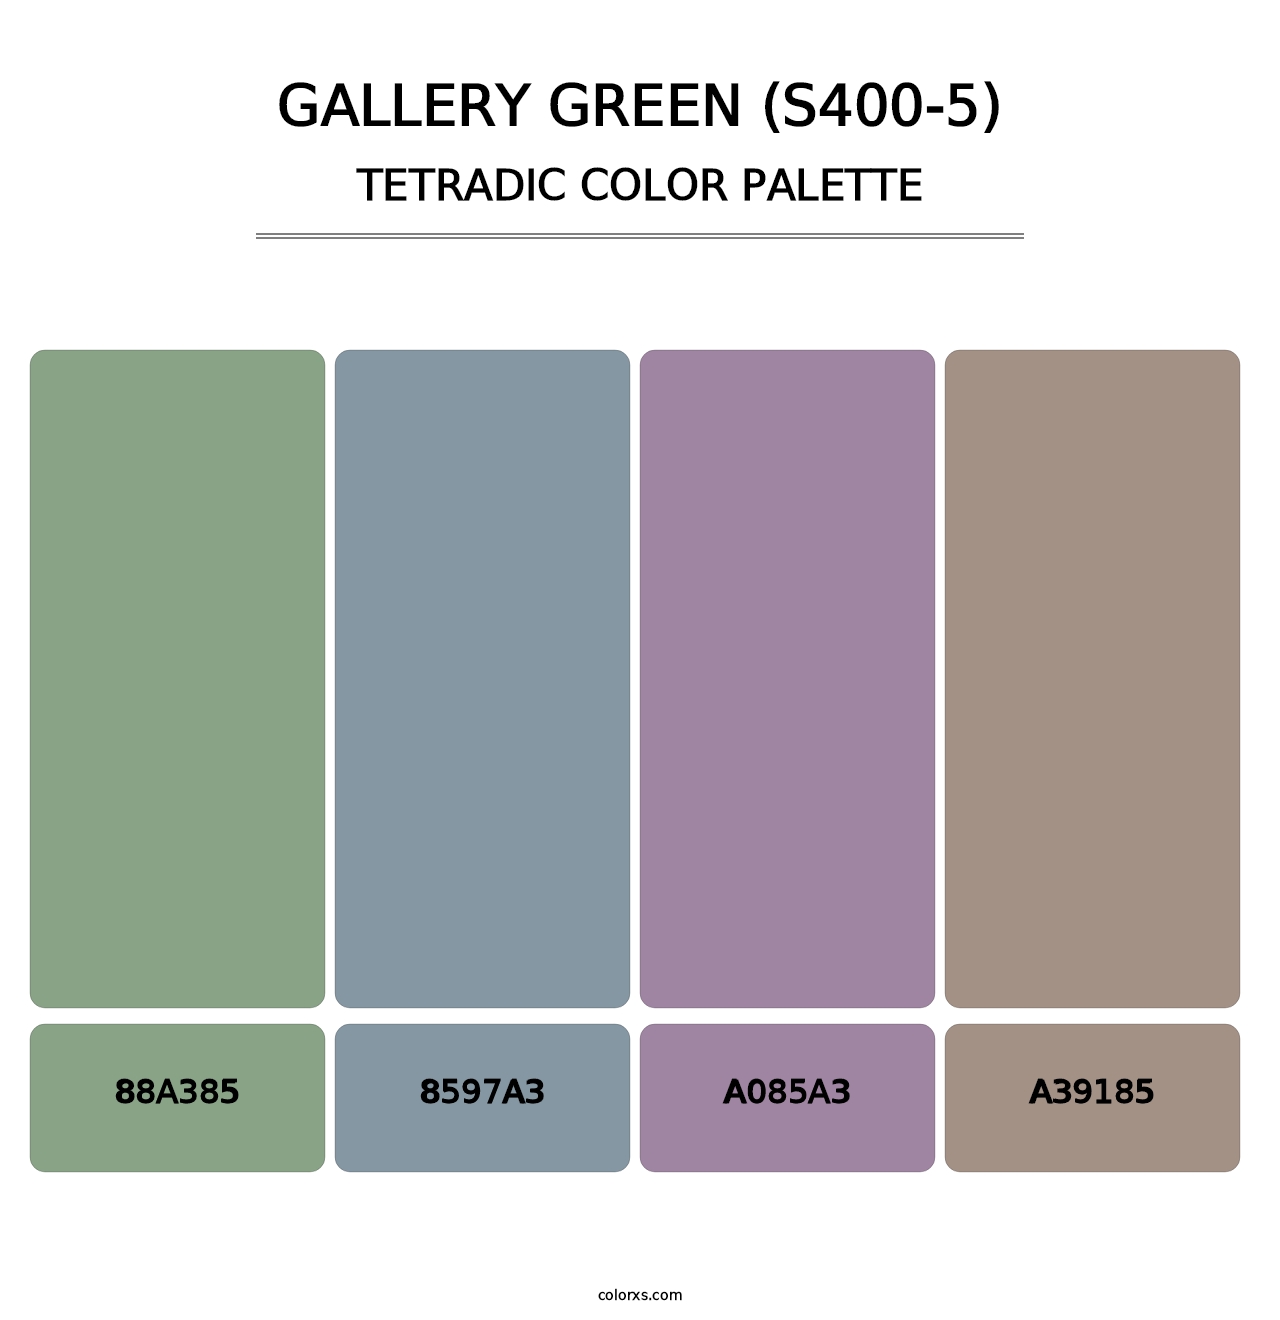 Gallery Green (S400-5) - Tetradic Color Palette